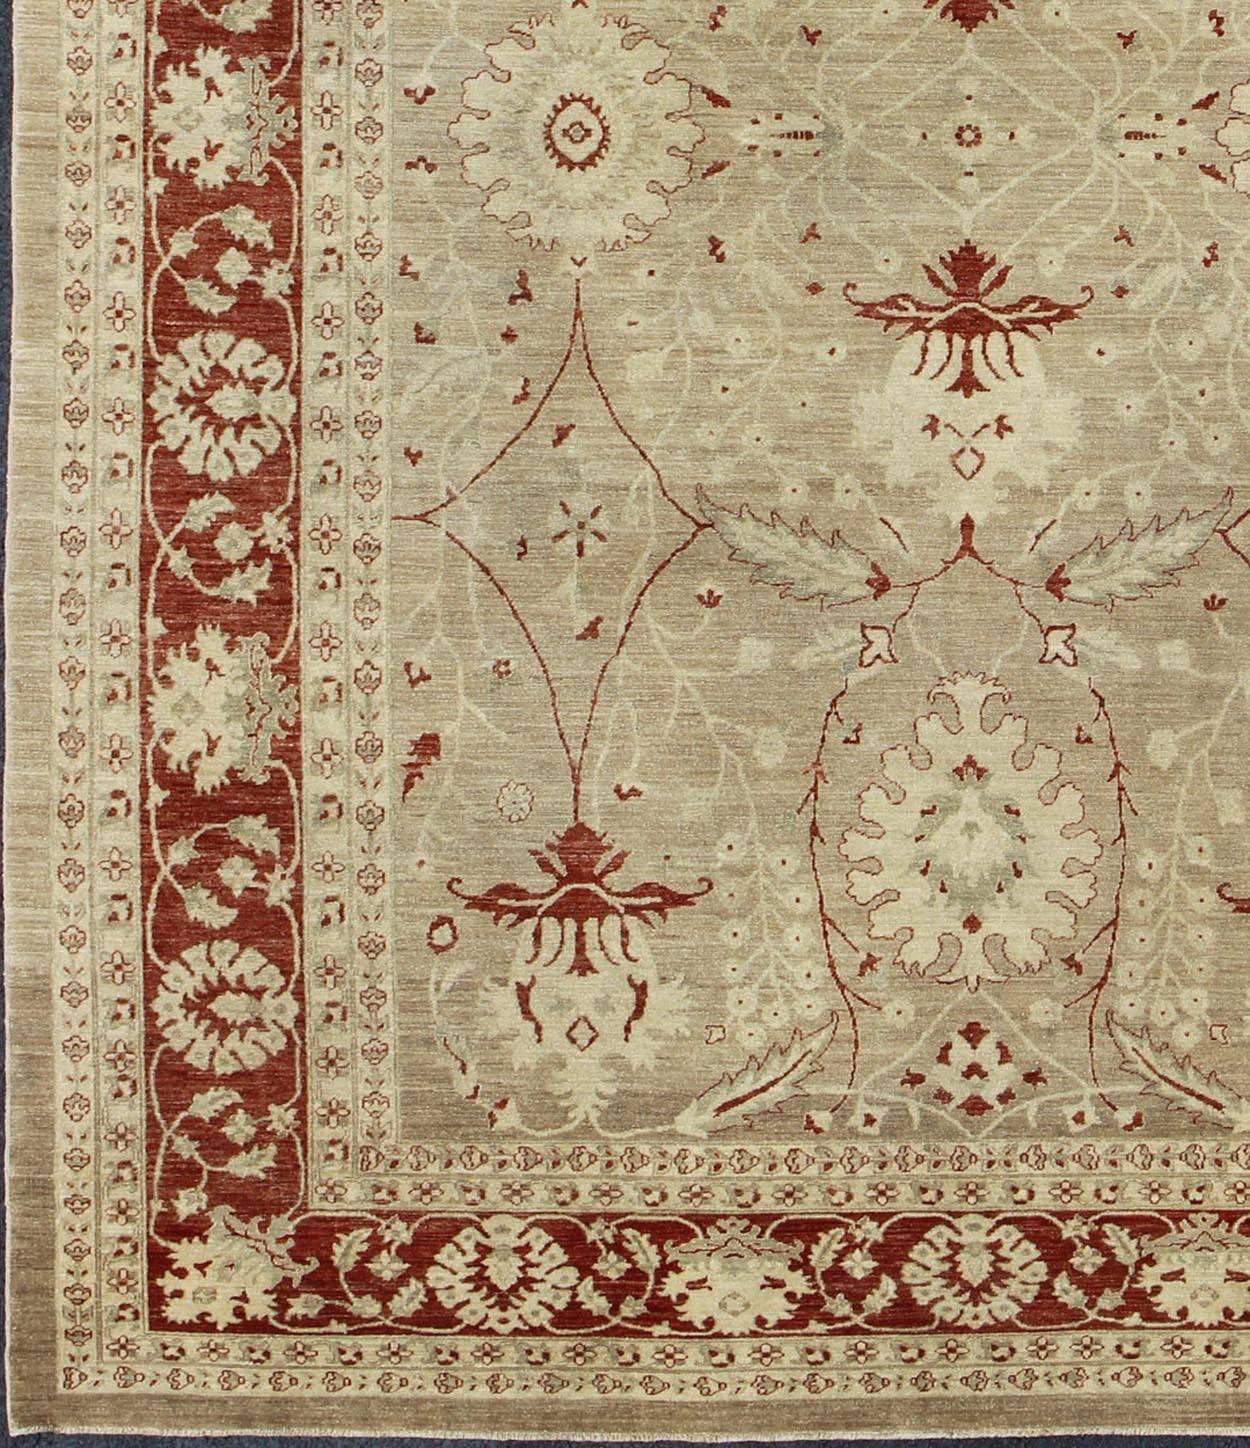 Large Vintage Sultanabad style fine rug with Stylized Floral Design in Cream and Garnet Red, Keivan Woven Arts / rug kb-97095, country of origin / type: Pakistan / Sultanabad.

Measures: 10' x 13'9

This vintage Sultanabad carpet from Pakistan